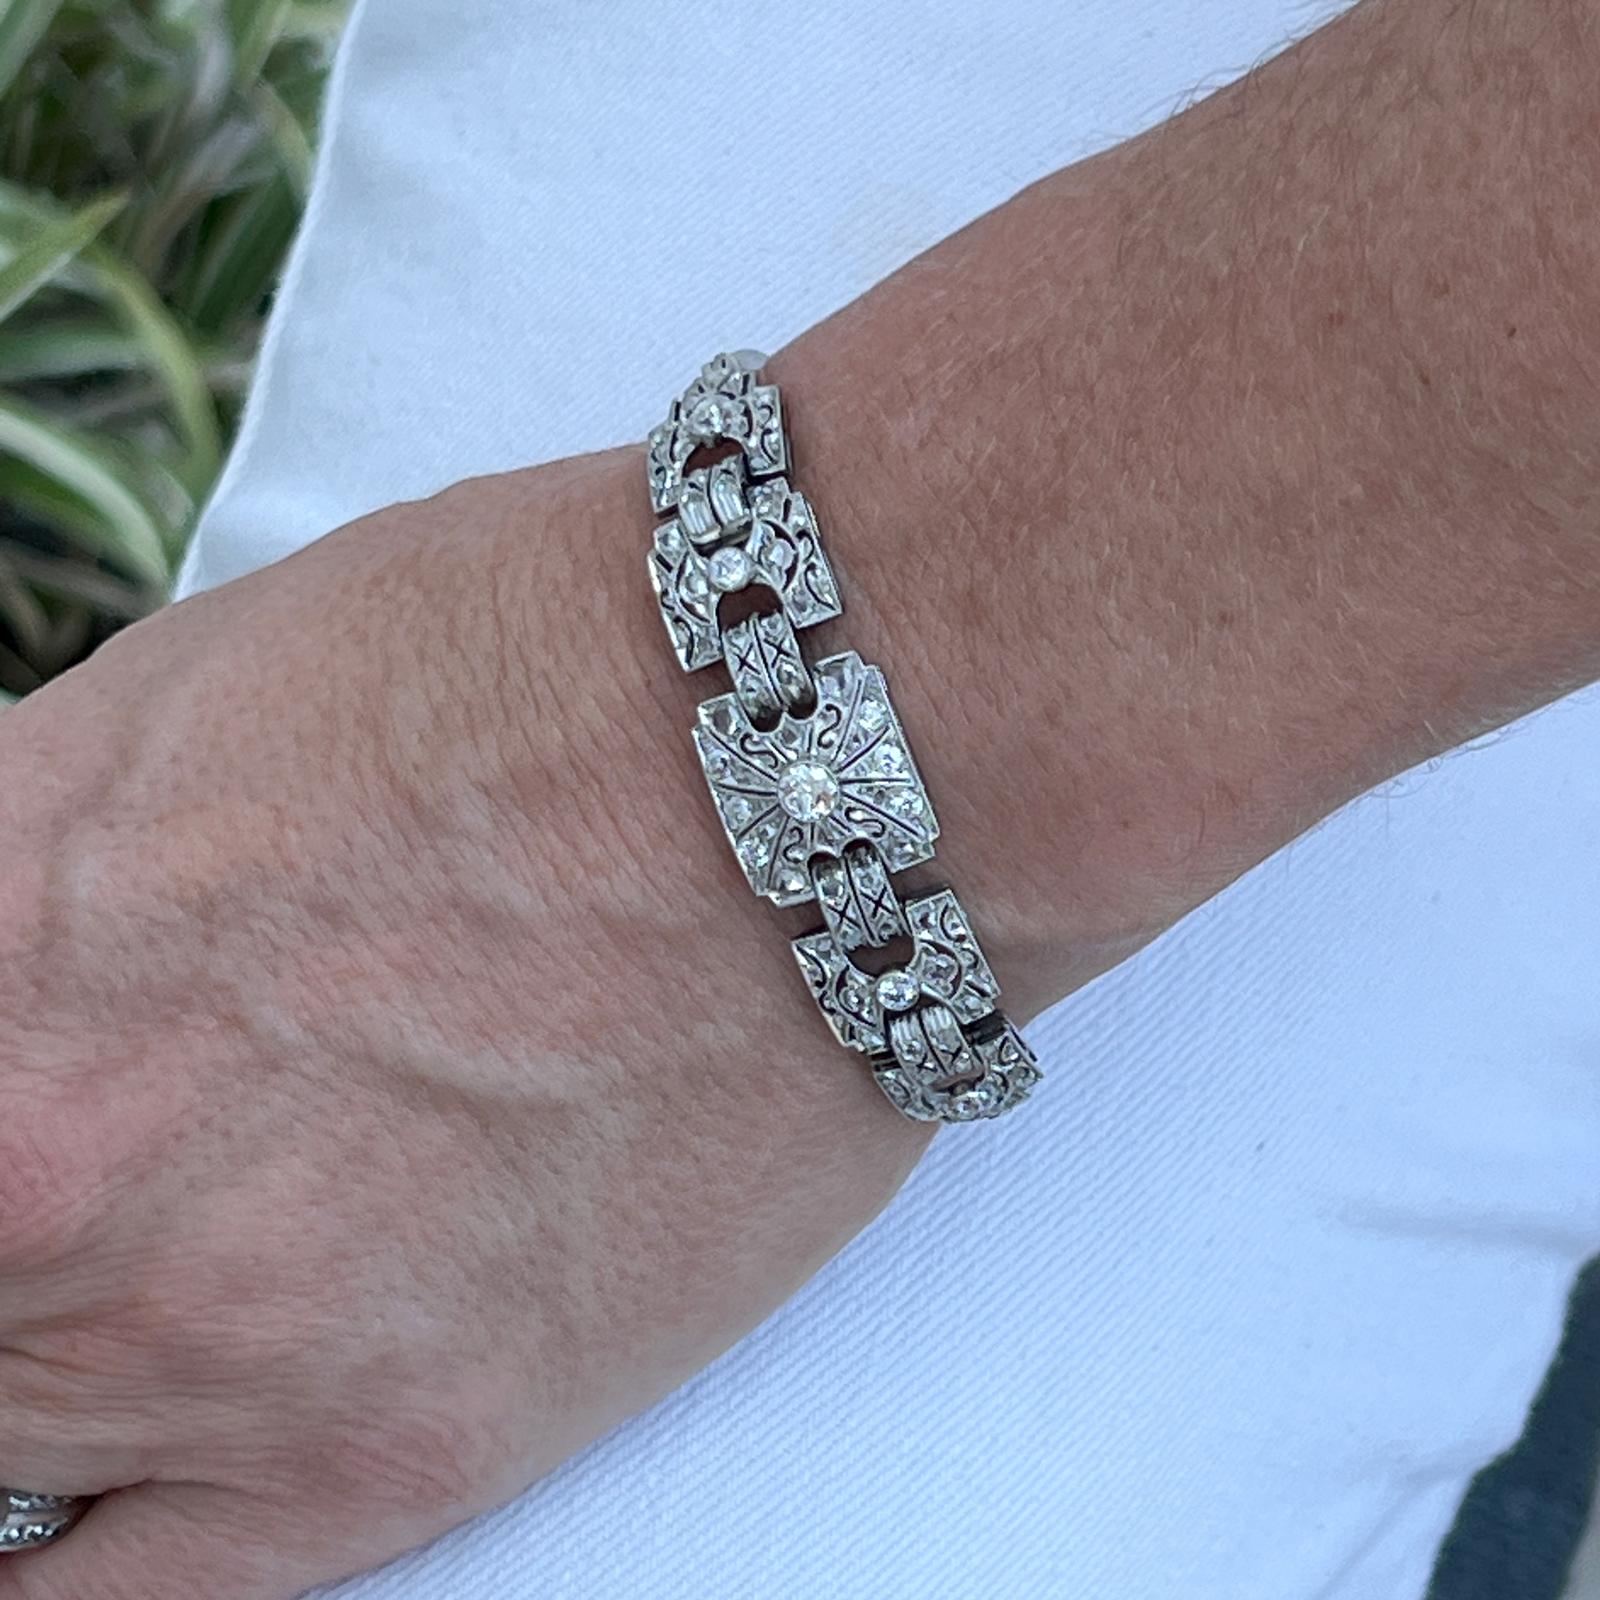 Beautiful and feminine Art Deco diamond bracelet handcrafted in platinum. The bracelet features 11 Old European and Old Mine cut diamonds weighing approximately 1.22 carat total weight as well as 62 rose cut diamonds weighing approximately .80 CTW